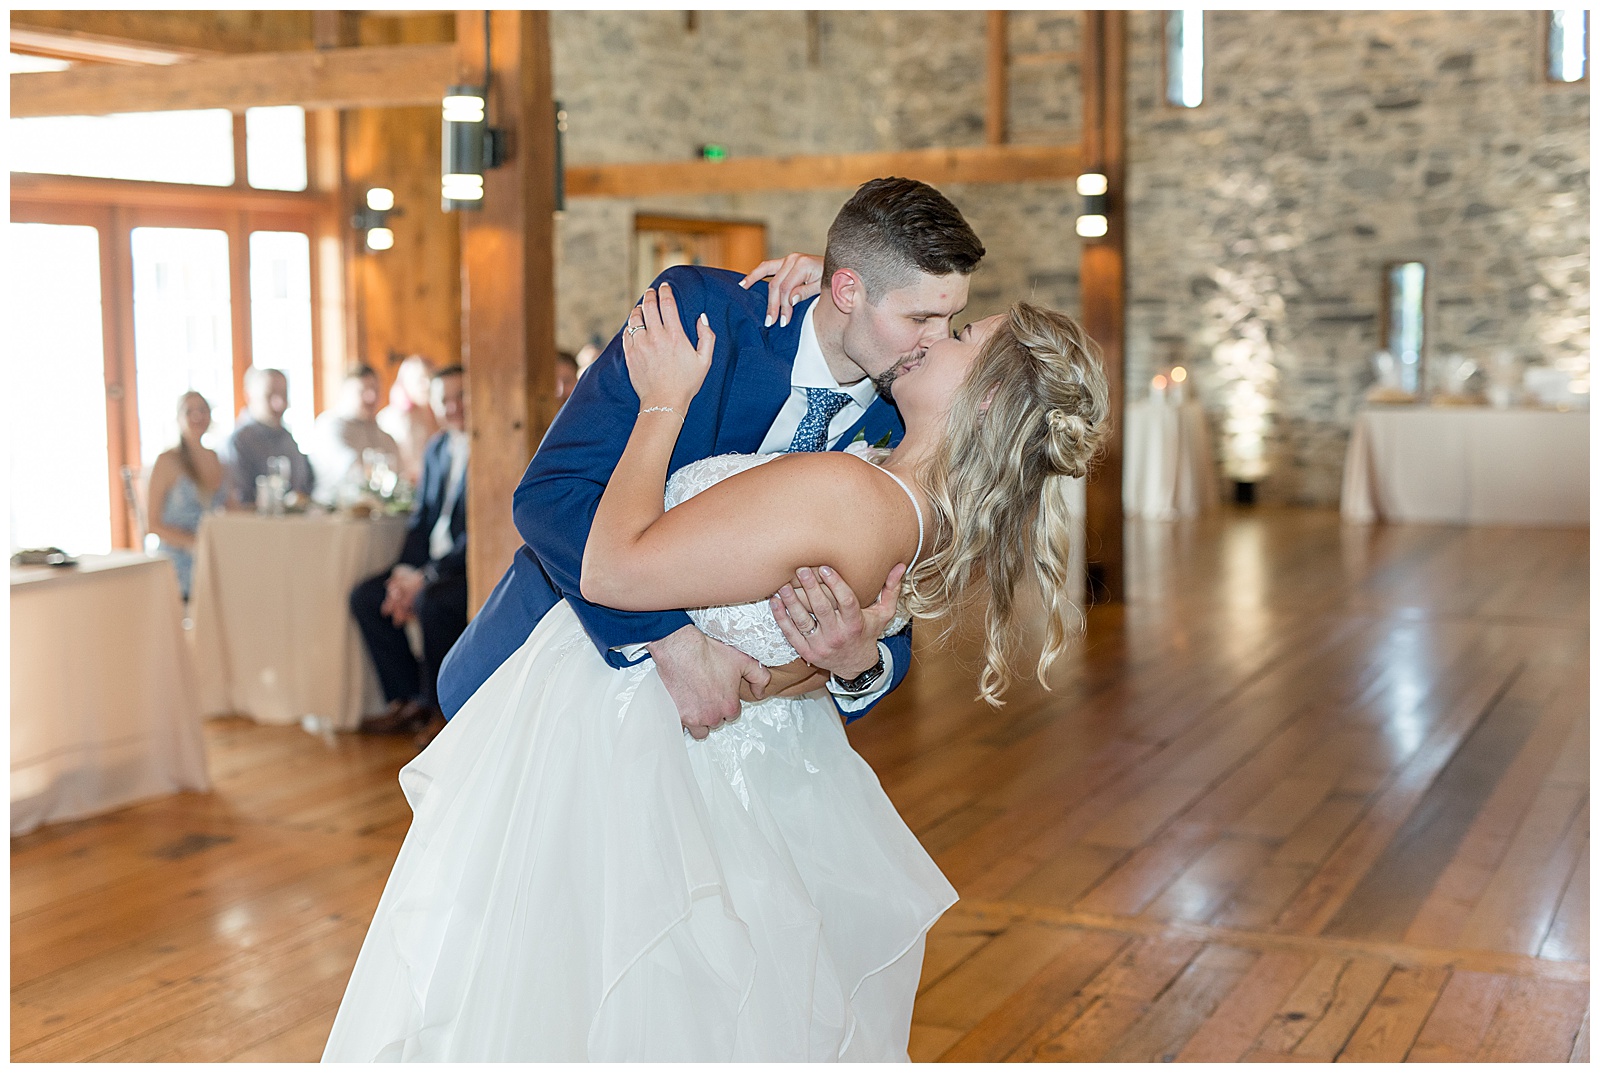 groom dips his bride back and kisses her during their first dance inside barn reception at the barn at silverstone